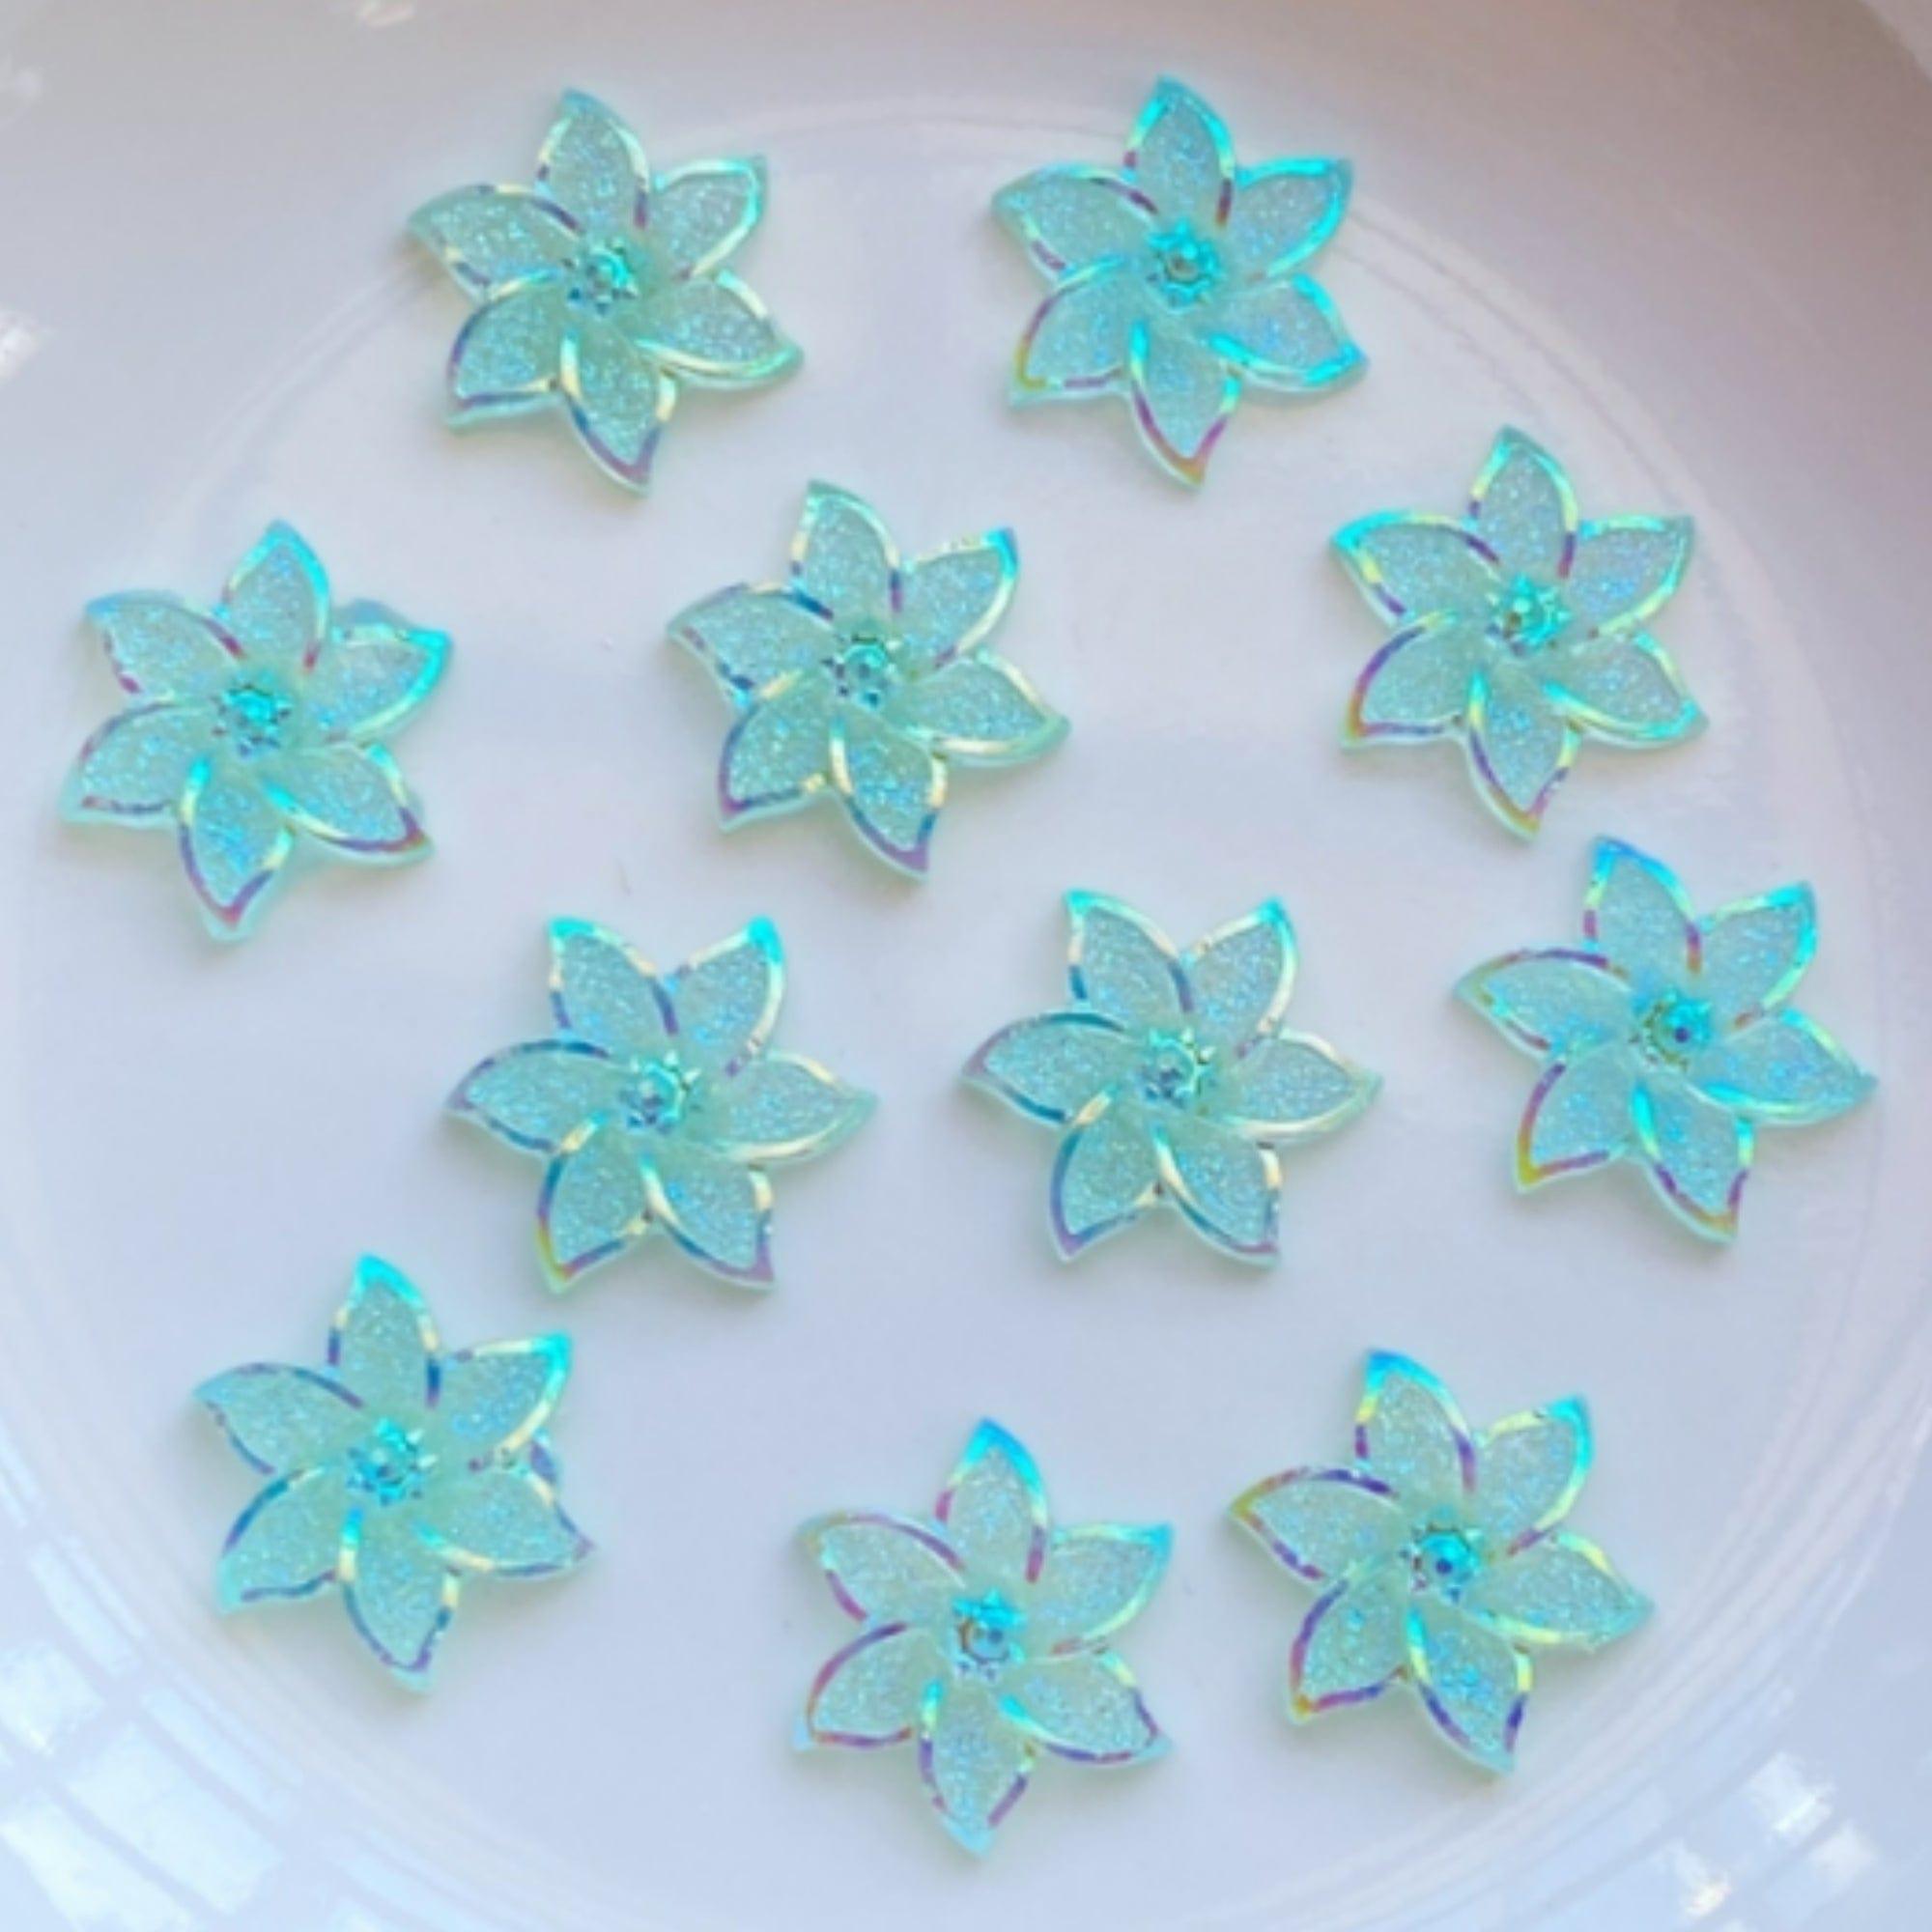 Iridescent Ice Blue Mini Flower Resin 1/2 inch Flatback Embellishments by SSC Designs - 10 pieces